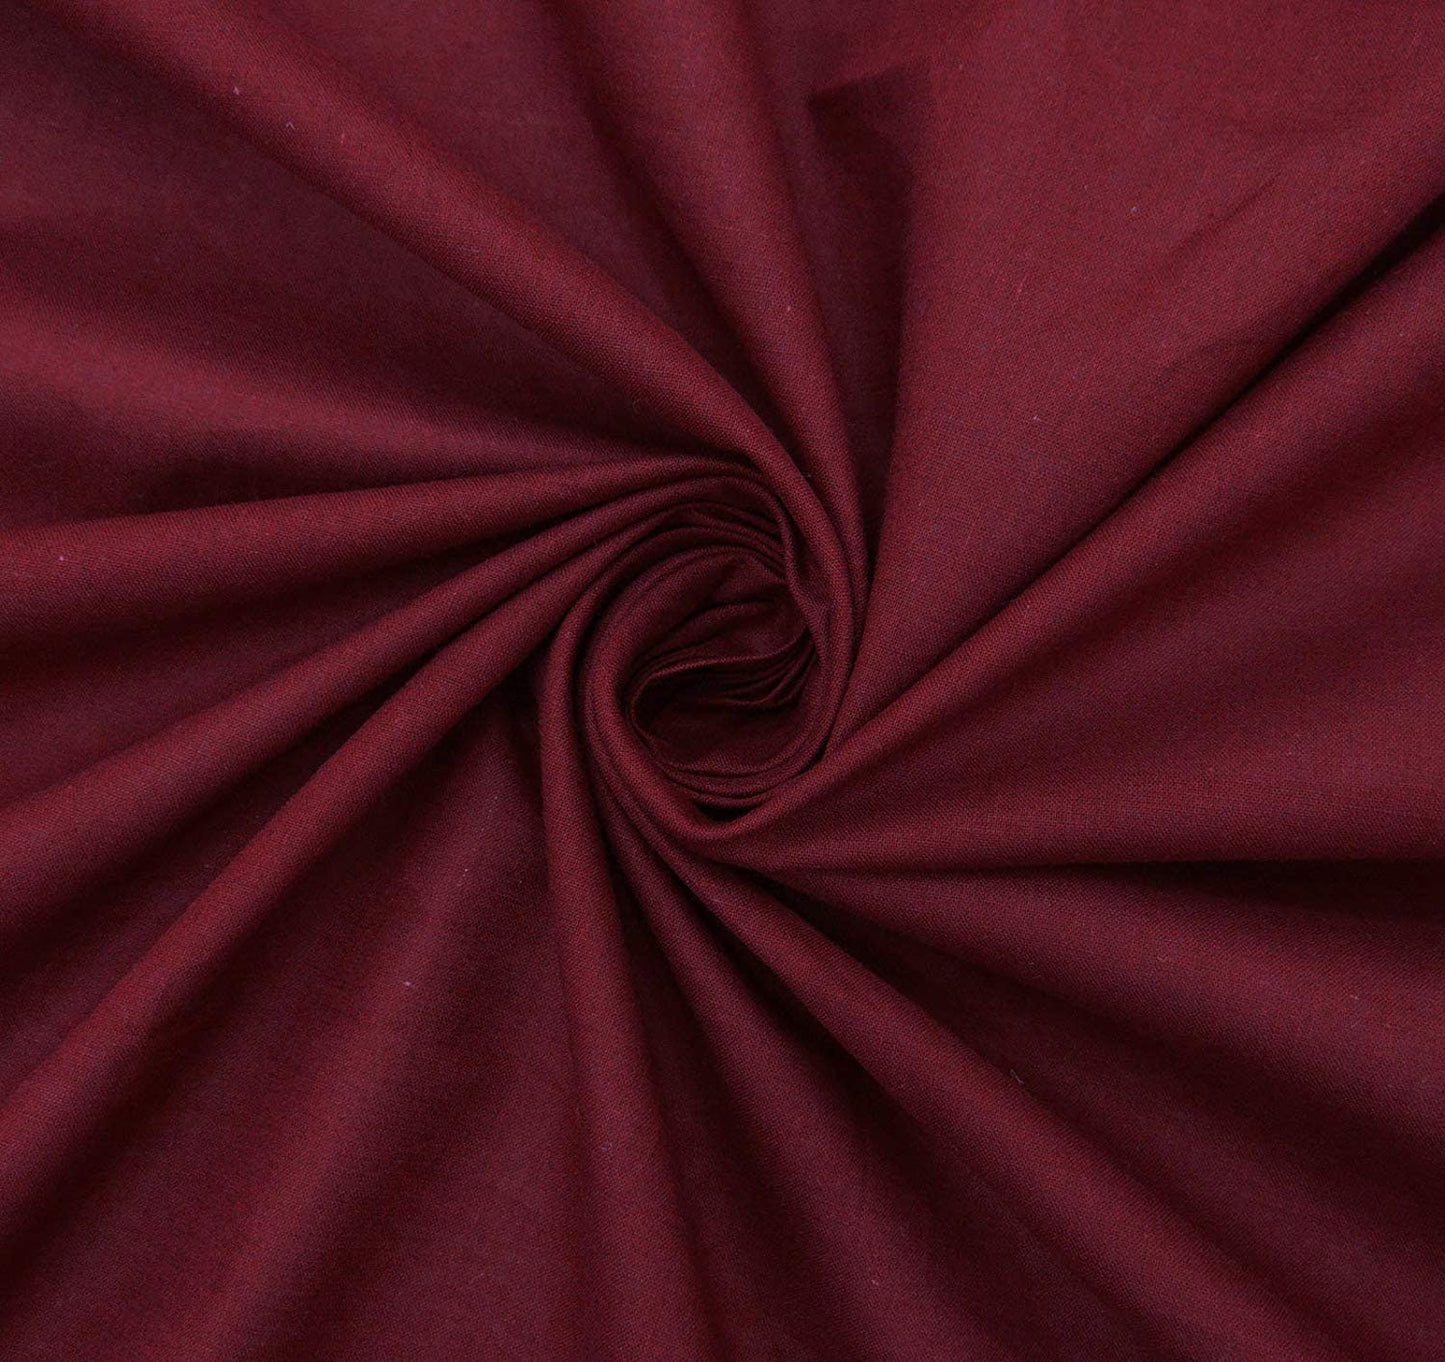 Premium Light Weight Poly Cotton Blend Broadcloth Fabric, Good to Make Face Mask Fabric (Burgundy, 1 Yard)